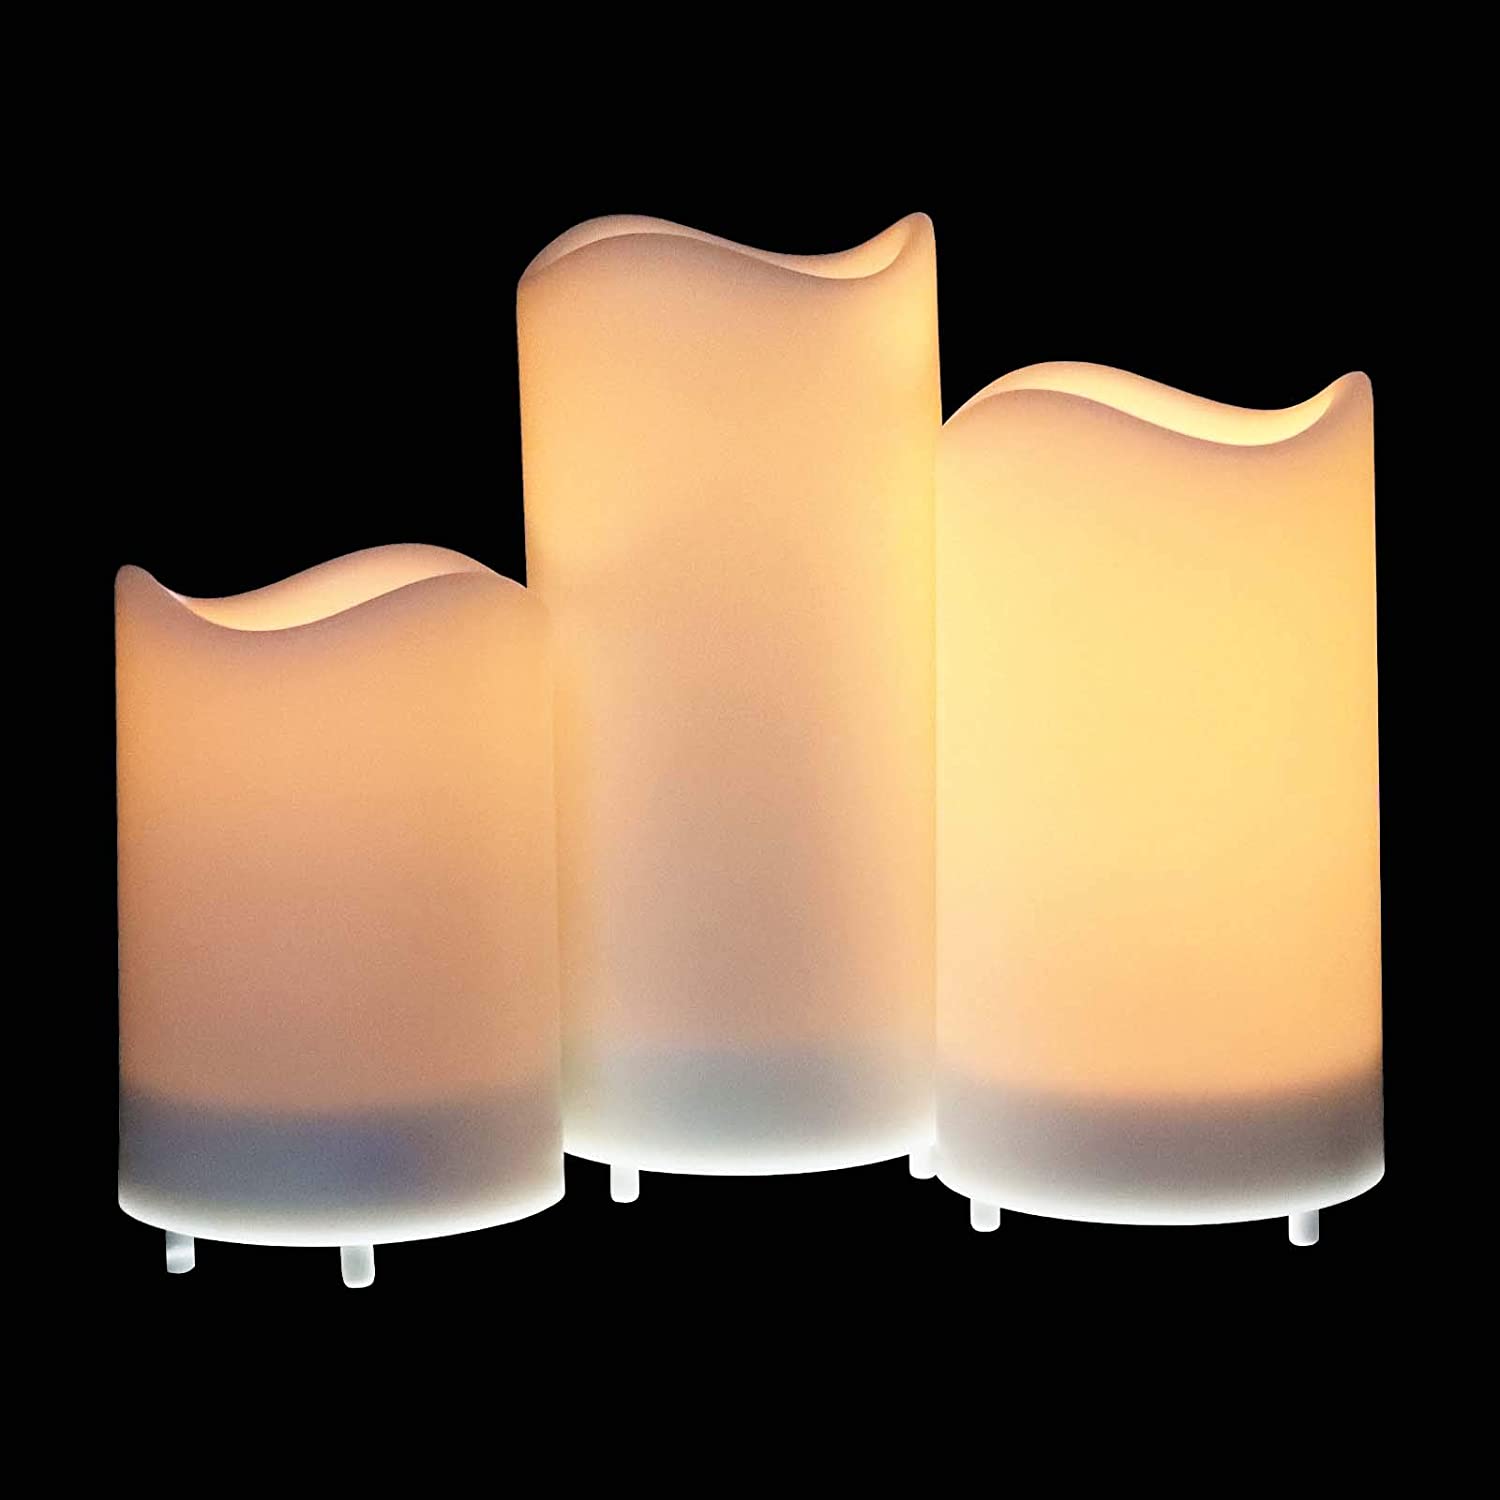 Solar LED Candle with Waterproof Light Sensor Dusk to Dawn on/Off Automatic Operating 3X5 Inch Flameless White Plastic Pillar Candles with Flickering Warm White Light 